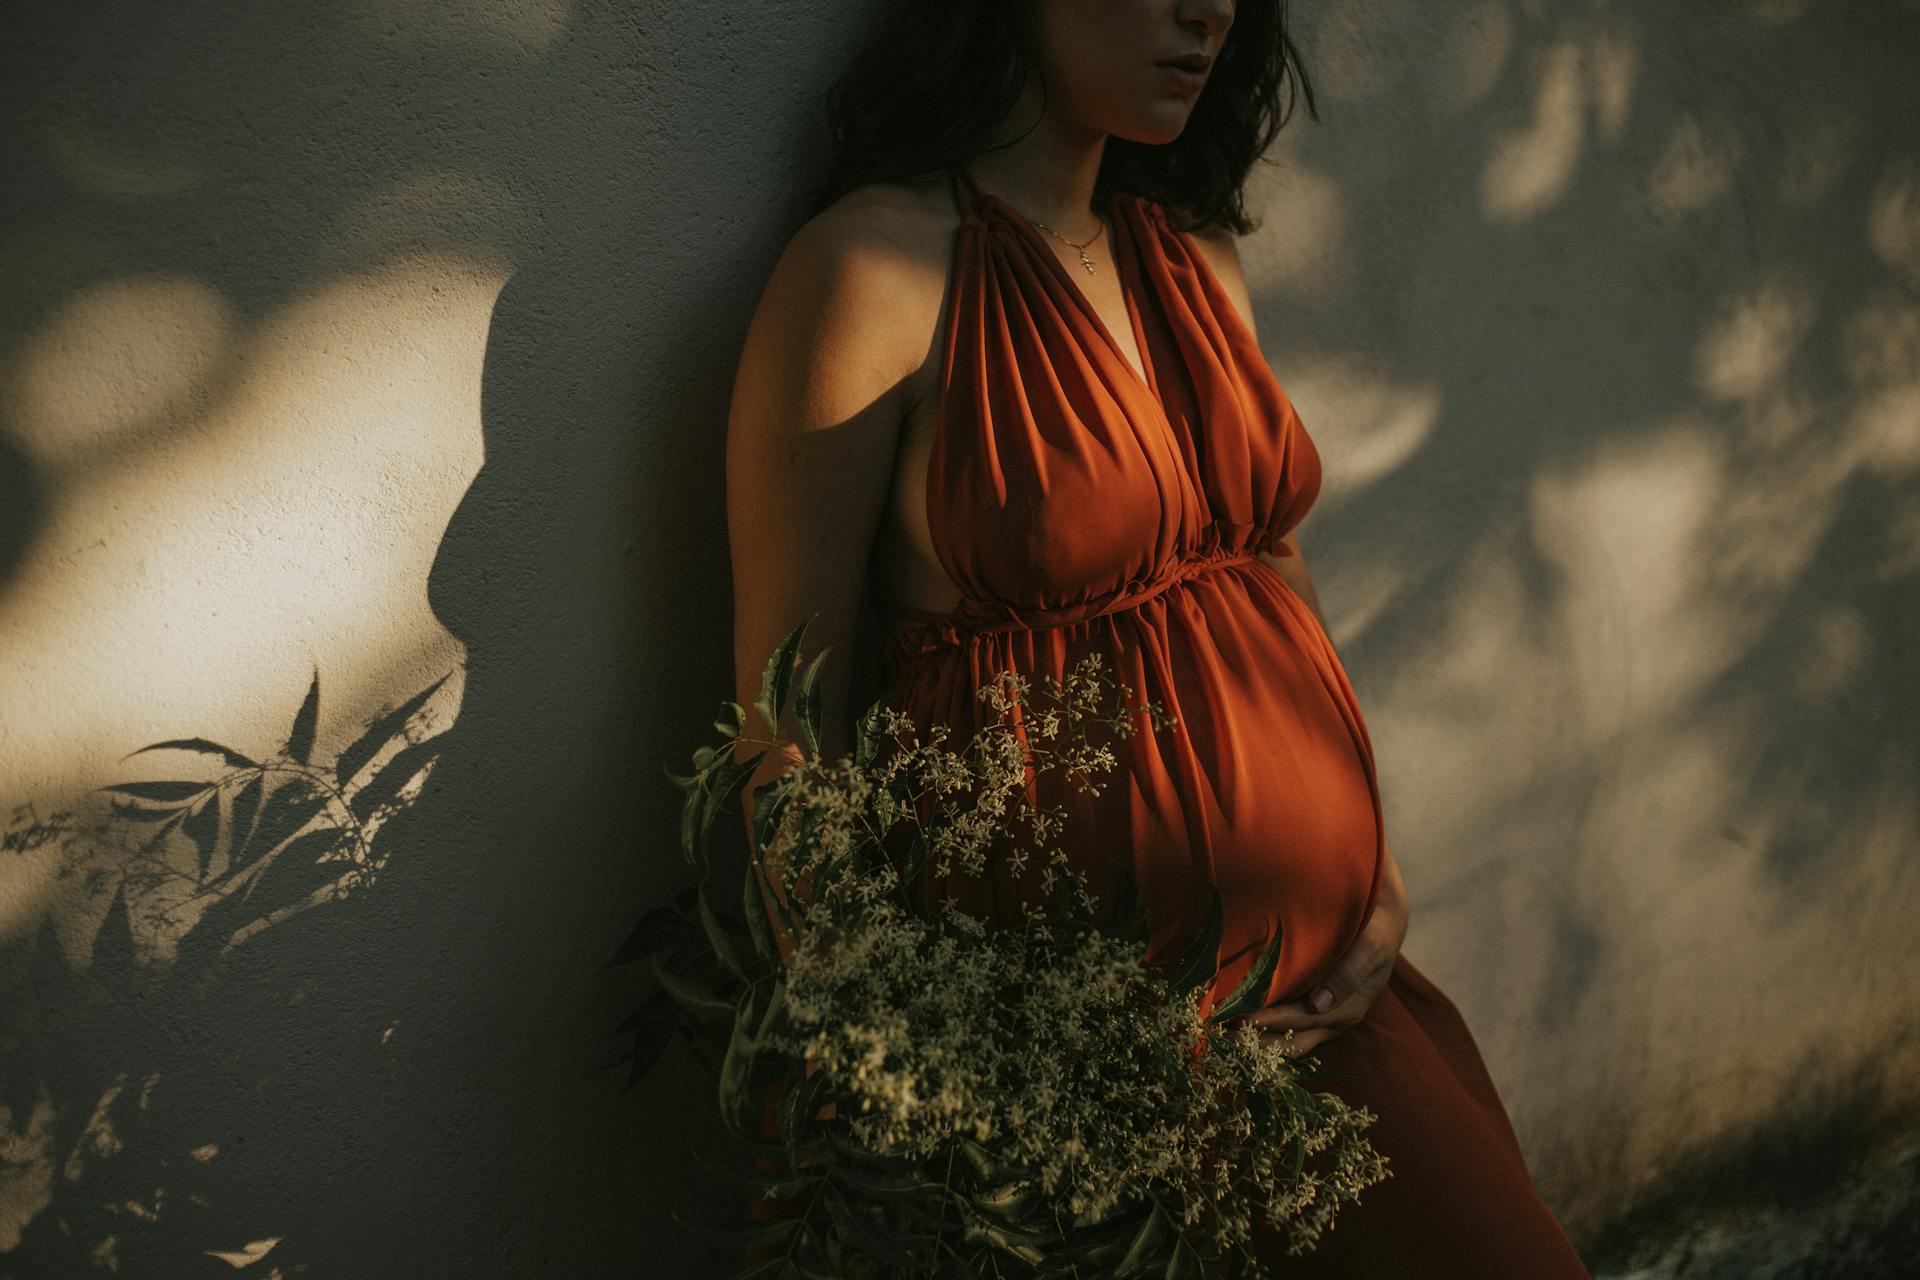 A pregnant woman standing against a wall | Source: Pexels